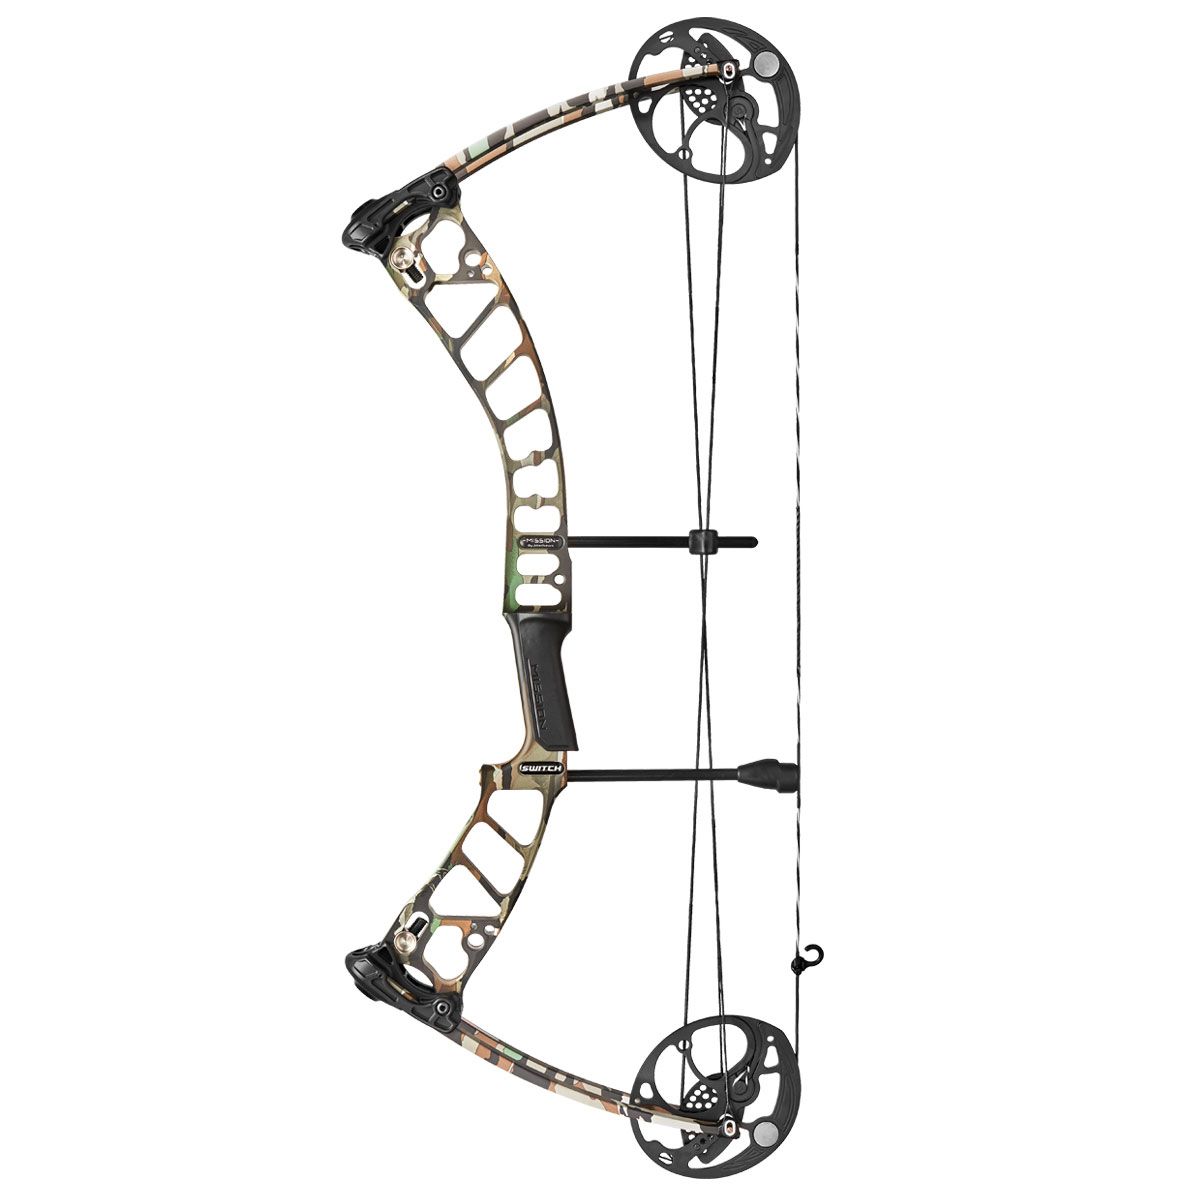 Mission Switch Compound Bow | Creed Archery Supply